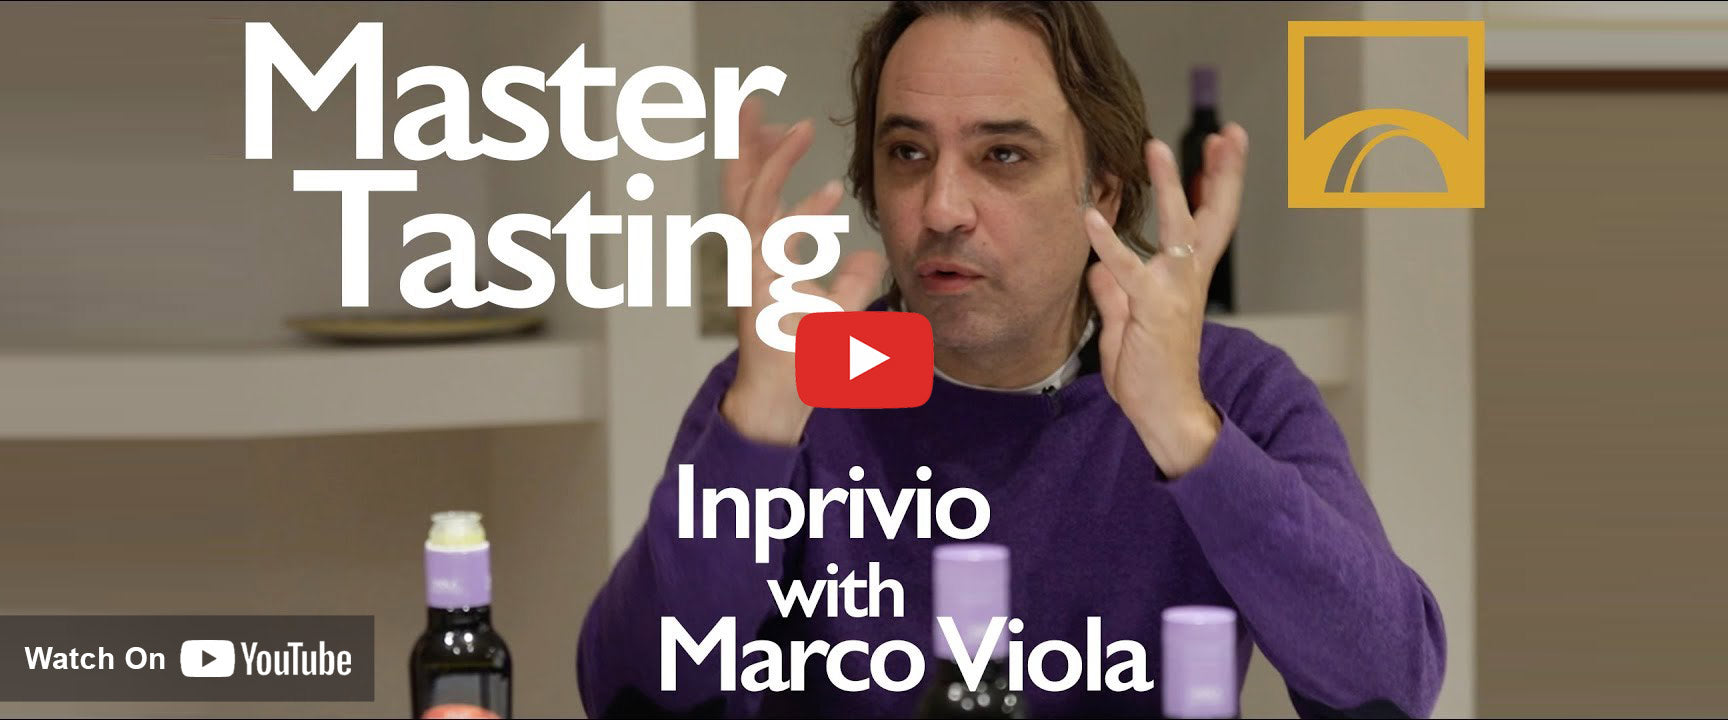 During an oil tasting session Marco Viola speaks expressively about his products.